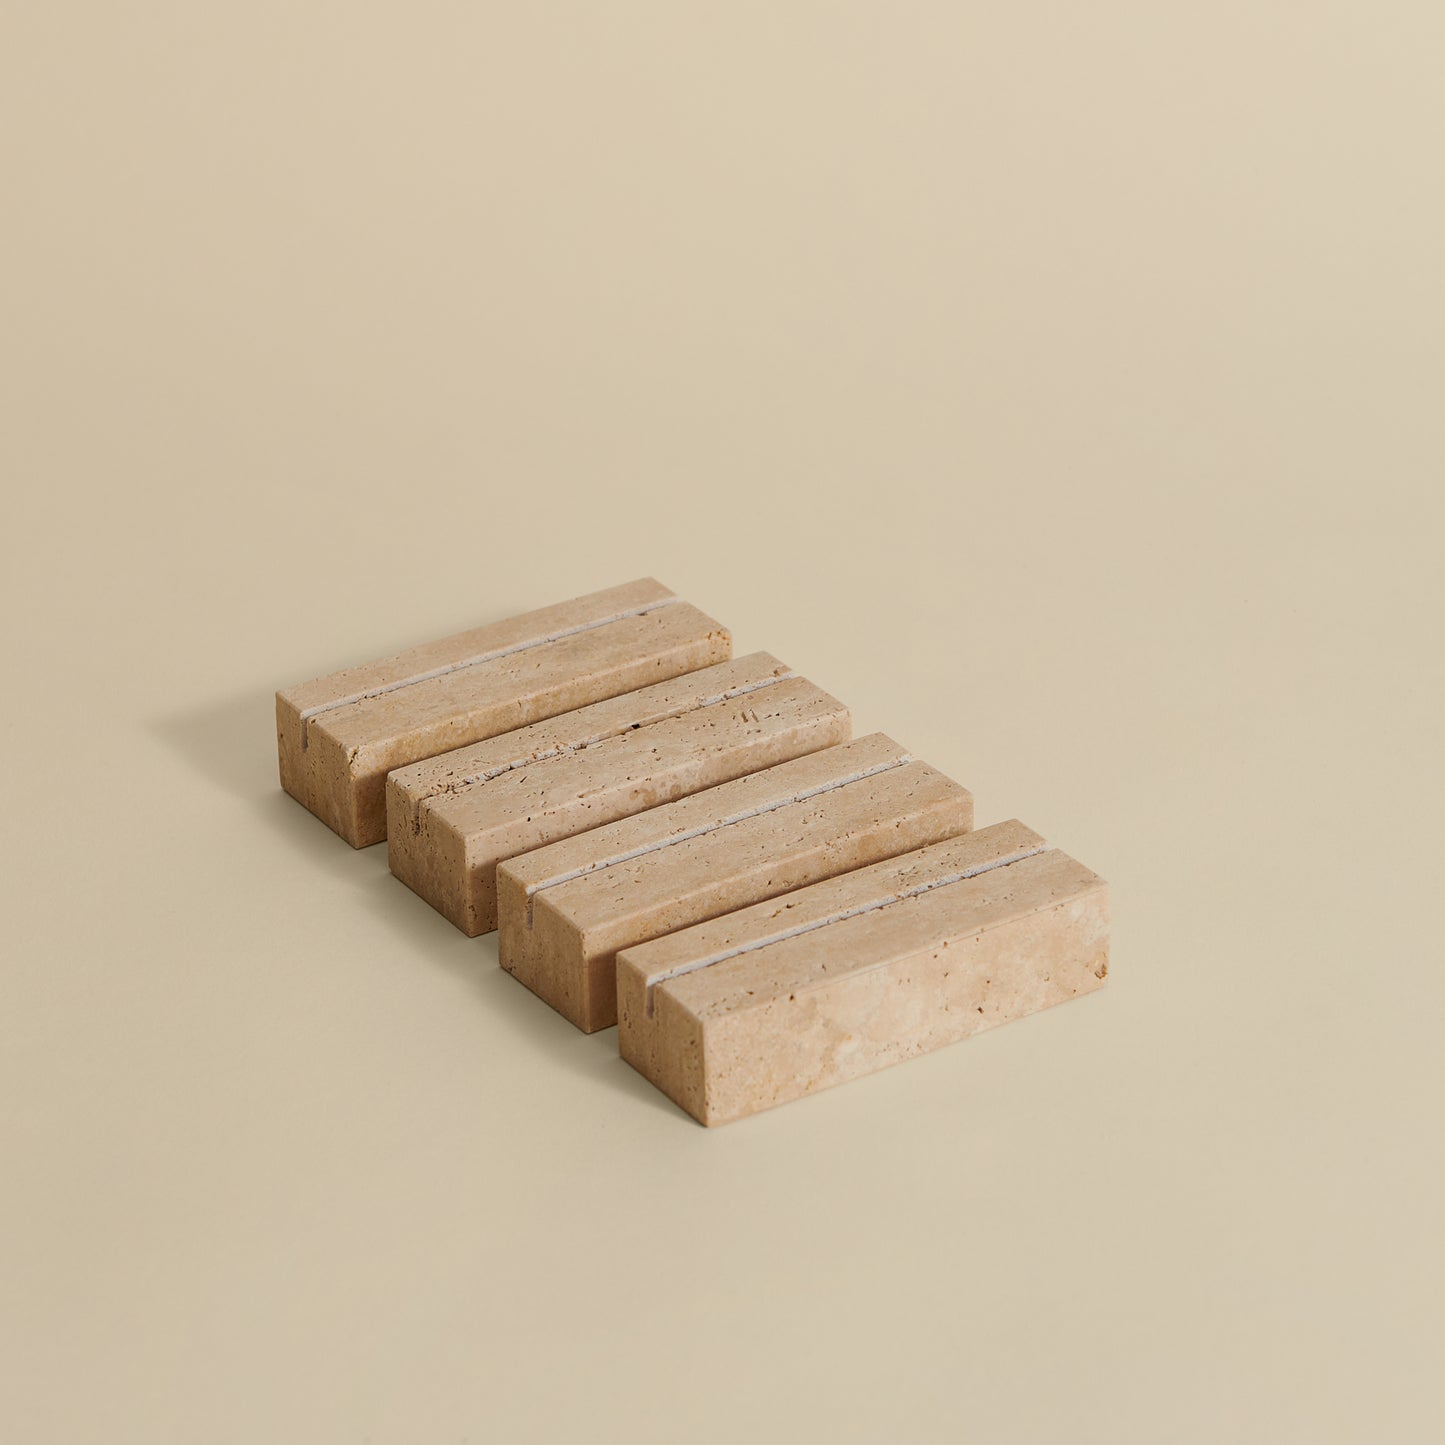 Large Travertine Place Card Holders, Set of 4